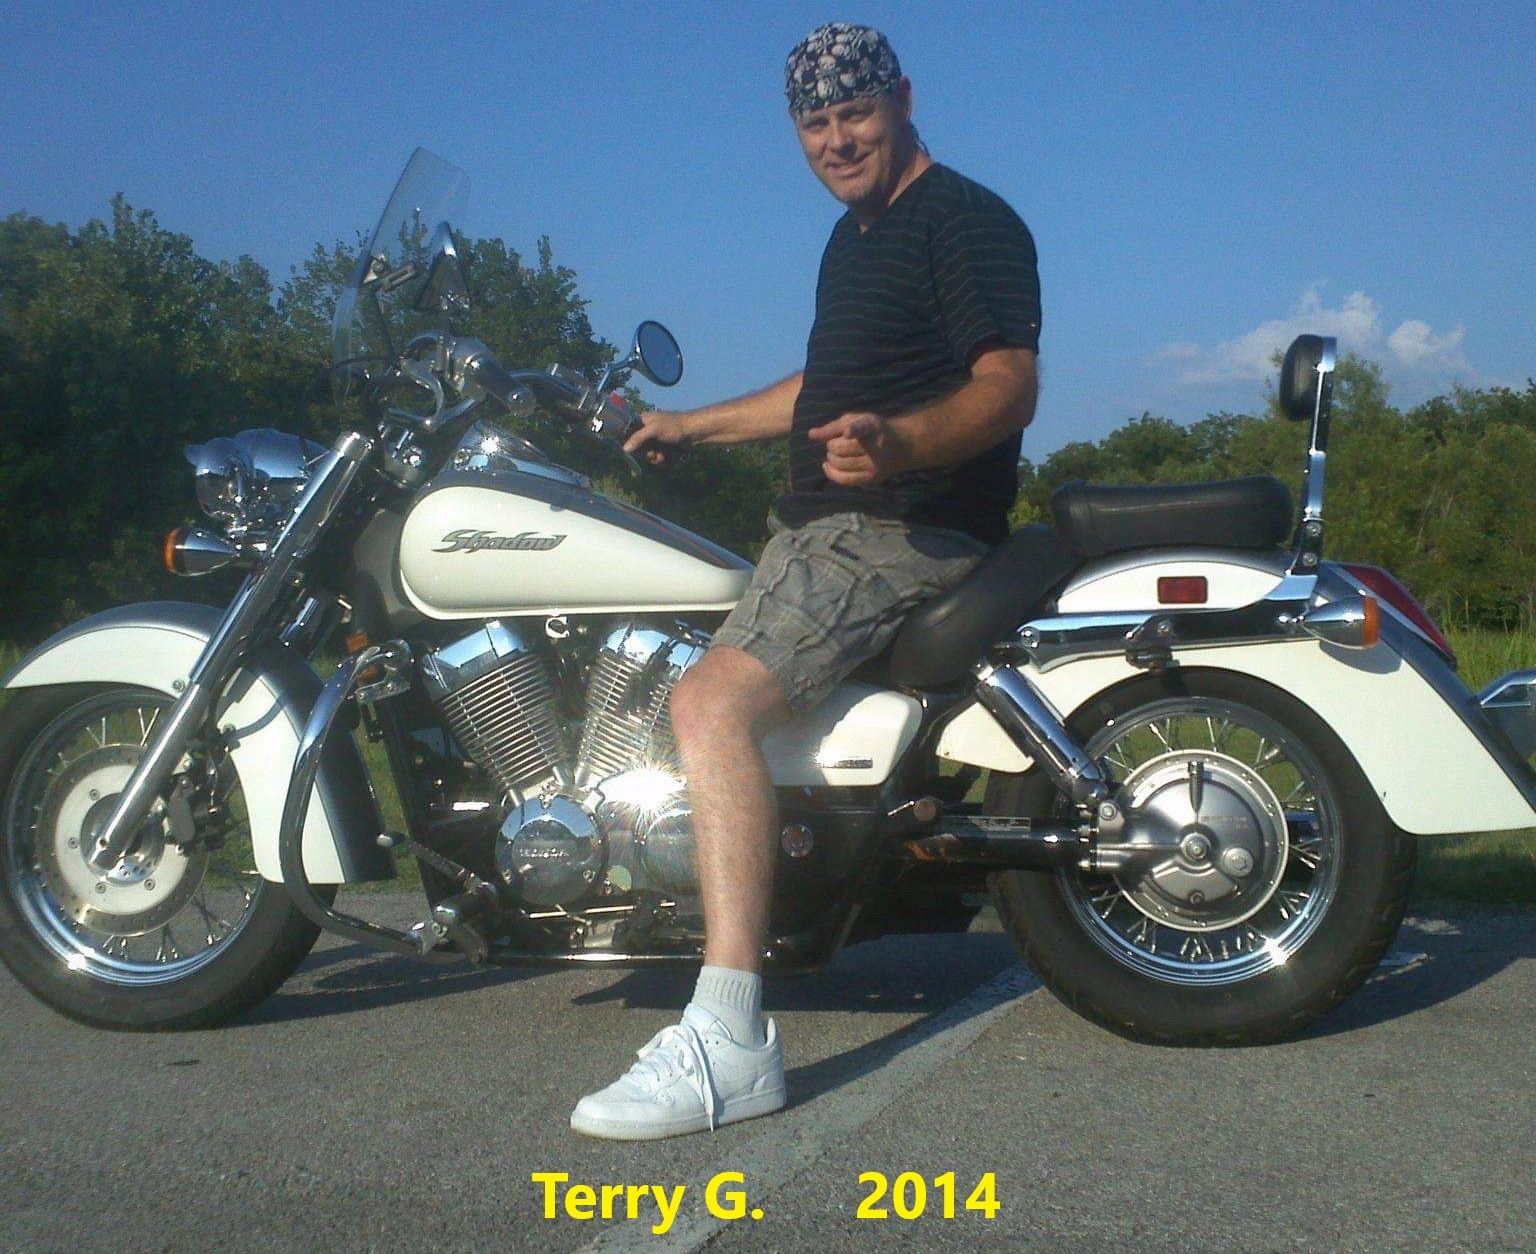 Terry G. two months before the ill-fated journey to Las Vegas, NV in 2014